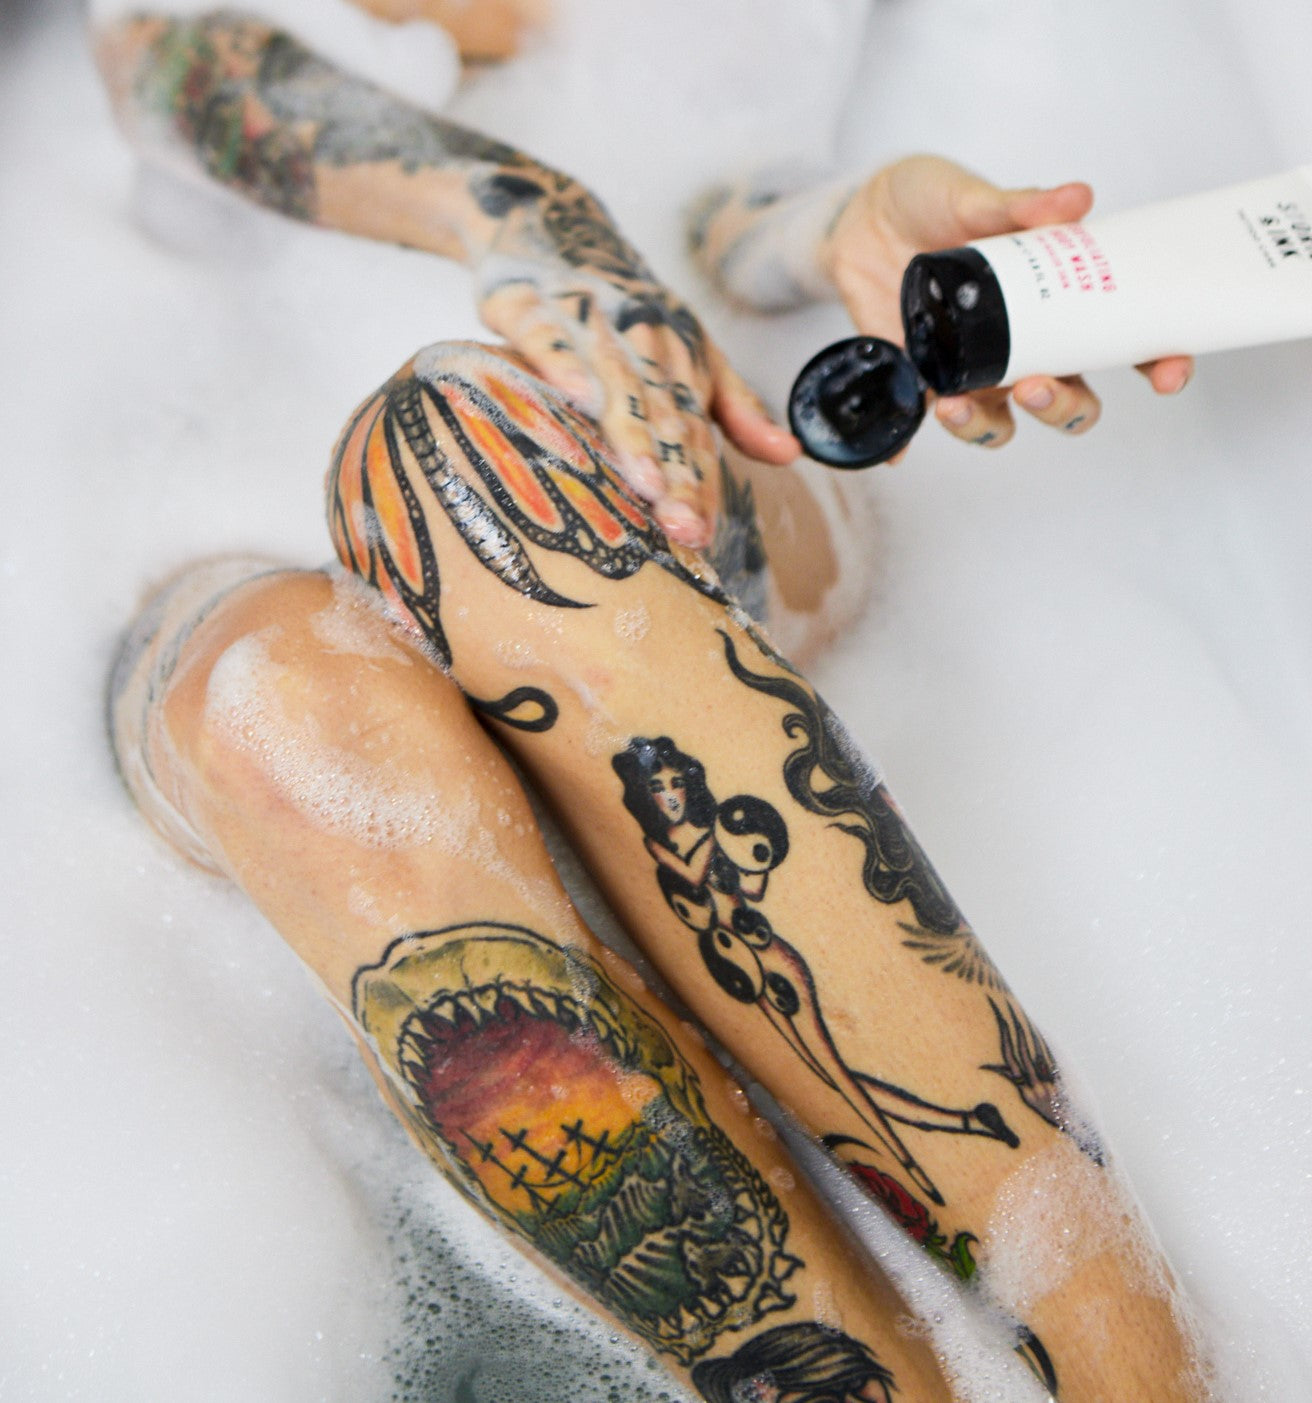 How Soon After A New Tattoo Can I Get in the Bath? – Stories and Ink